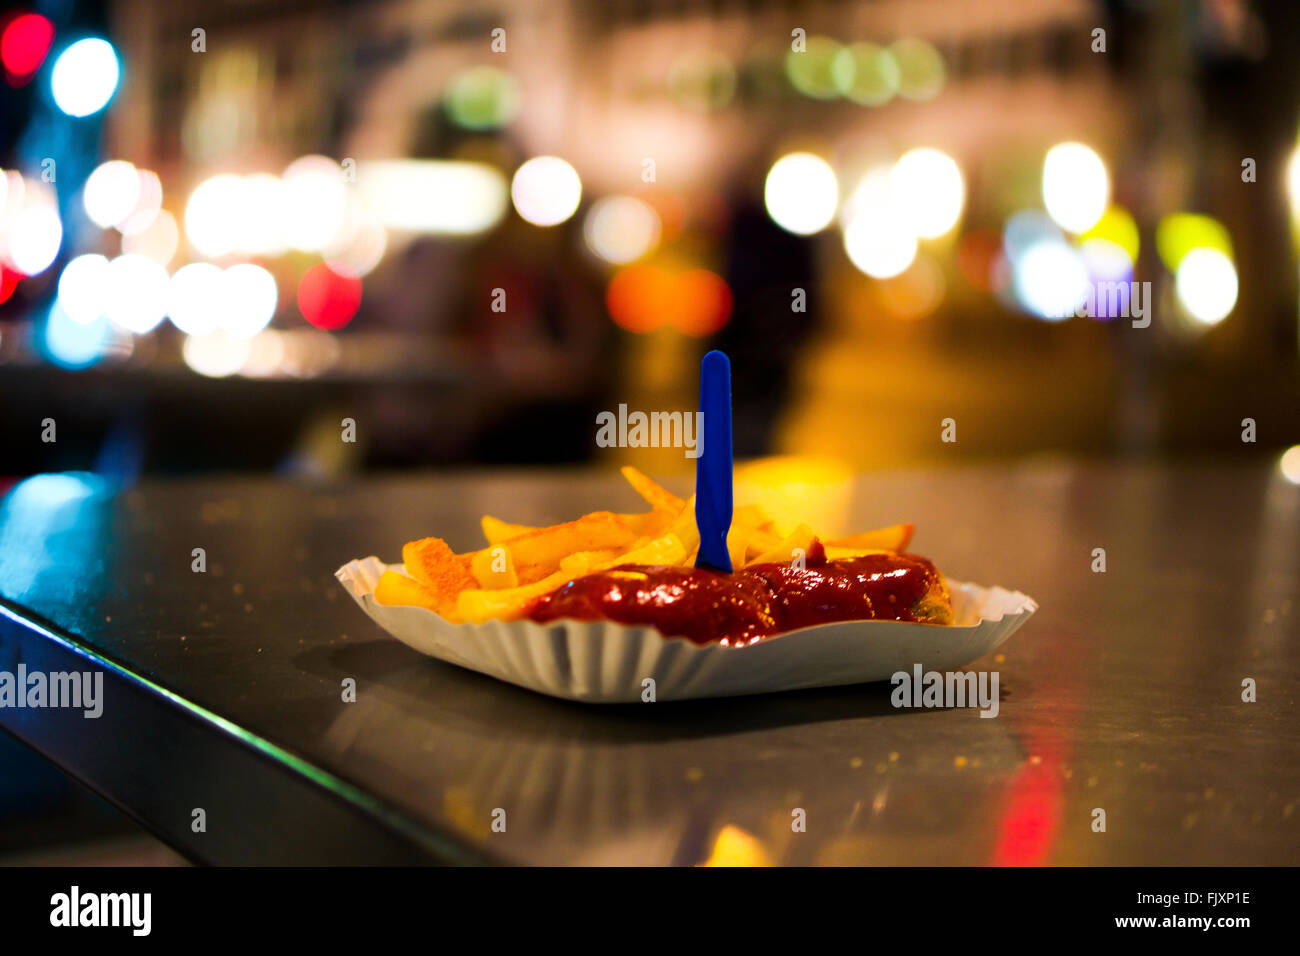 Currywurst Served In Plate On Table Stock Photo